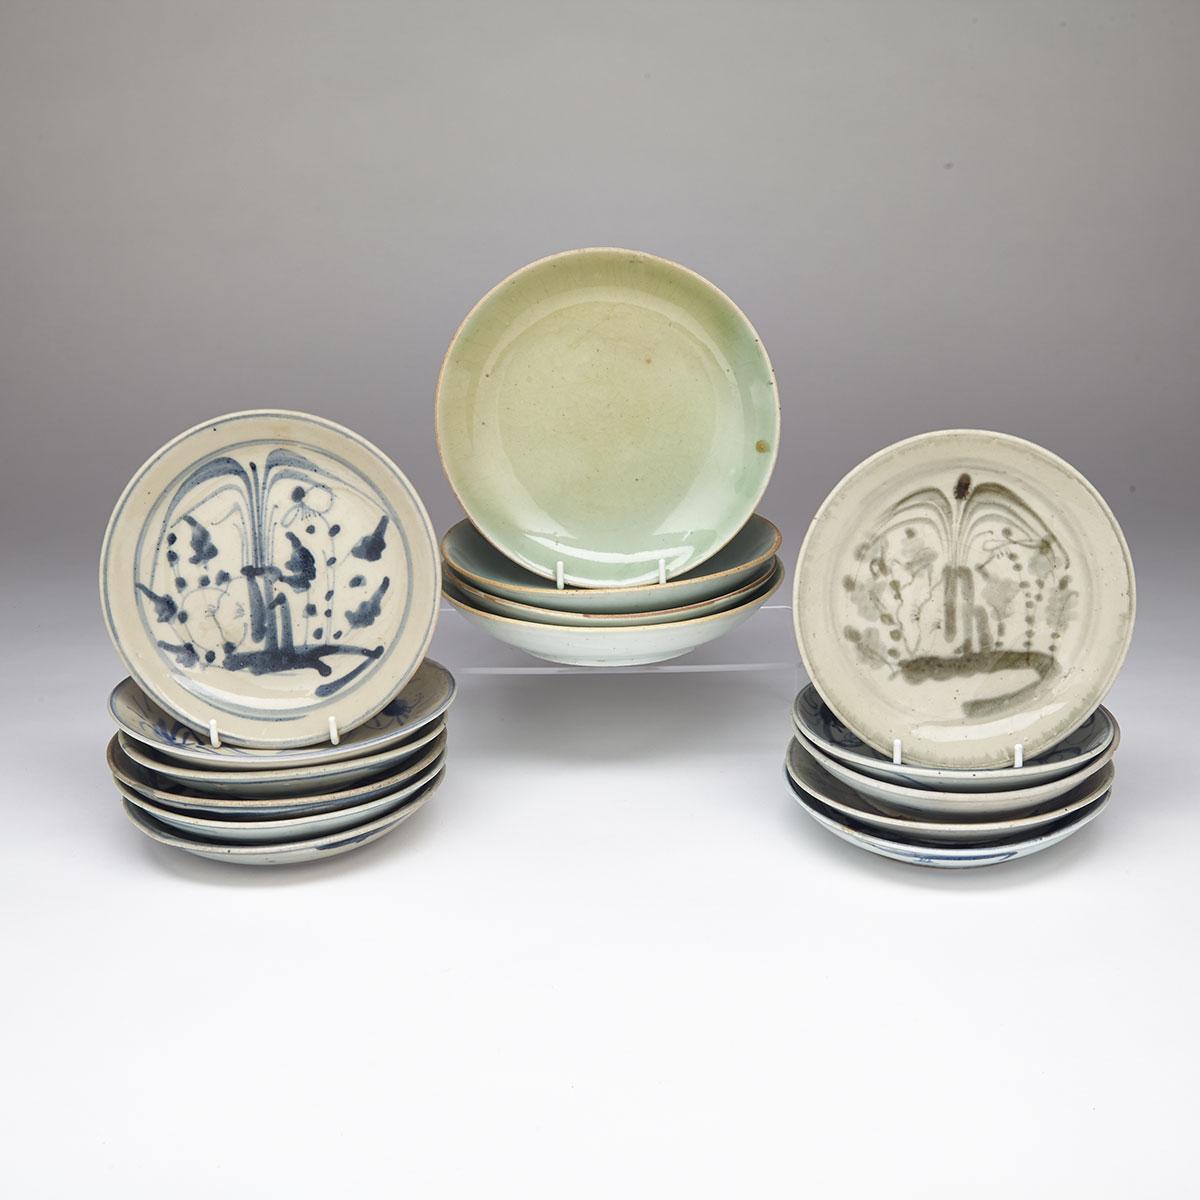 Eleven Blue and White Dishes, Chinese and South East Asia, 16th to 19th Century